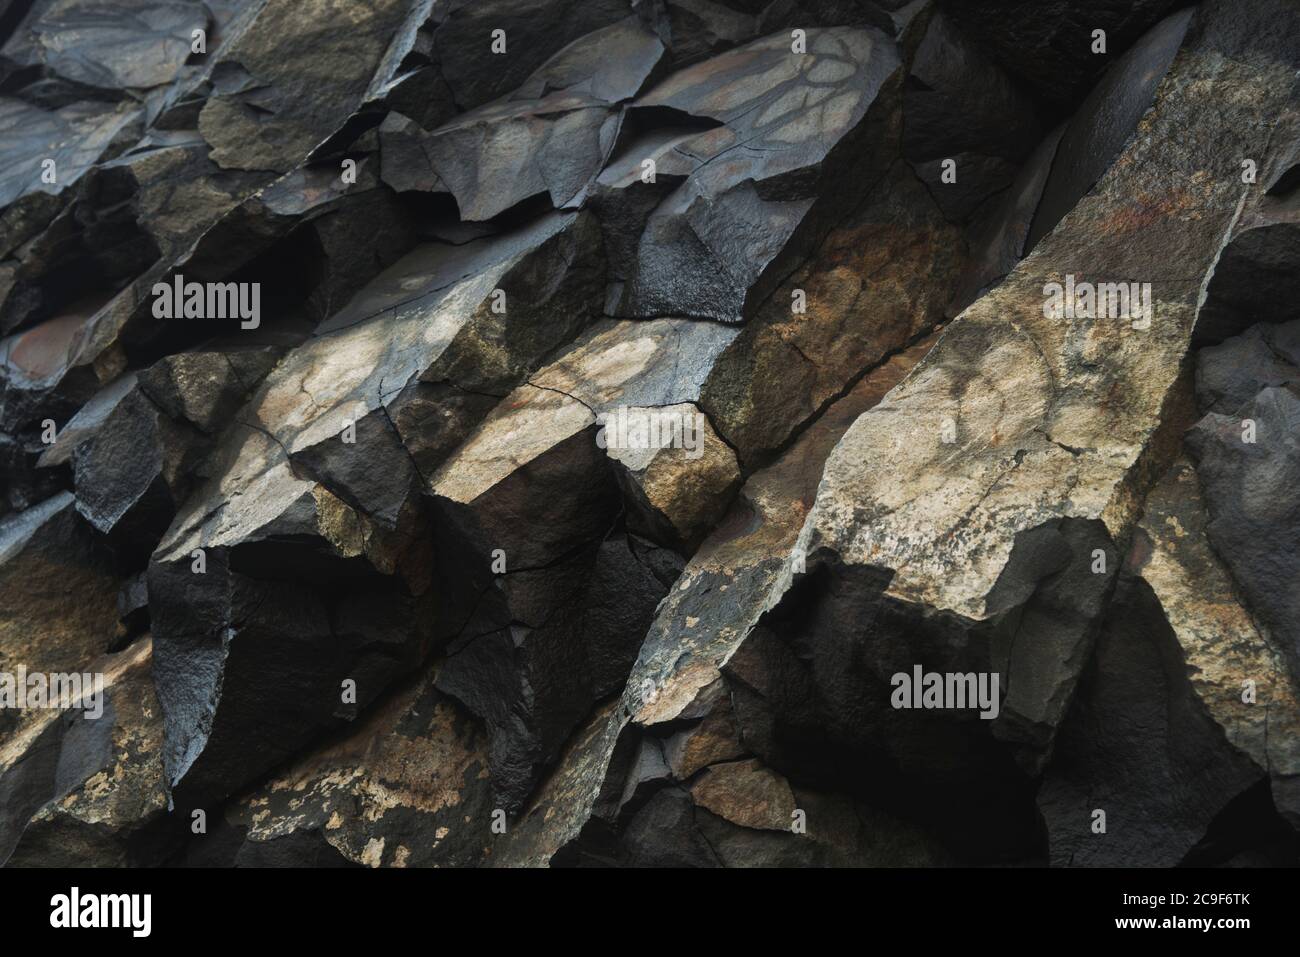 https://c8.alamy.com/comp/2C9F6TK/close-up-of-a-yellow-and-black-rock-formation-at-the-base-of-a-cliff-sharp-detail-and-texture-throughout-2C9F6TK.jpg